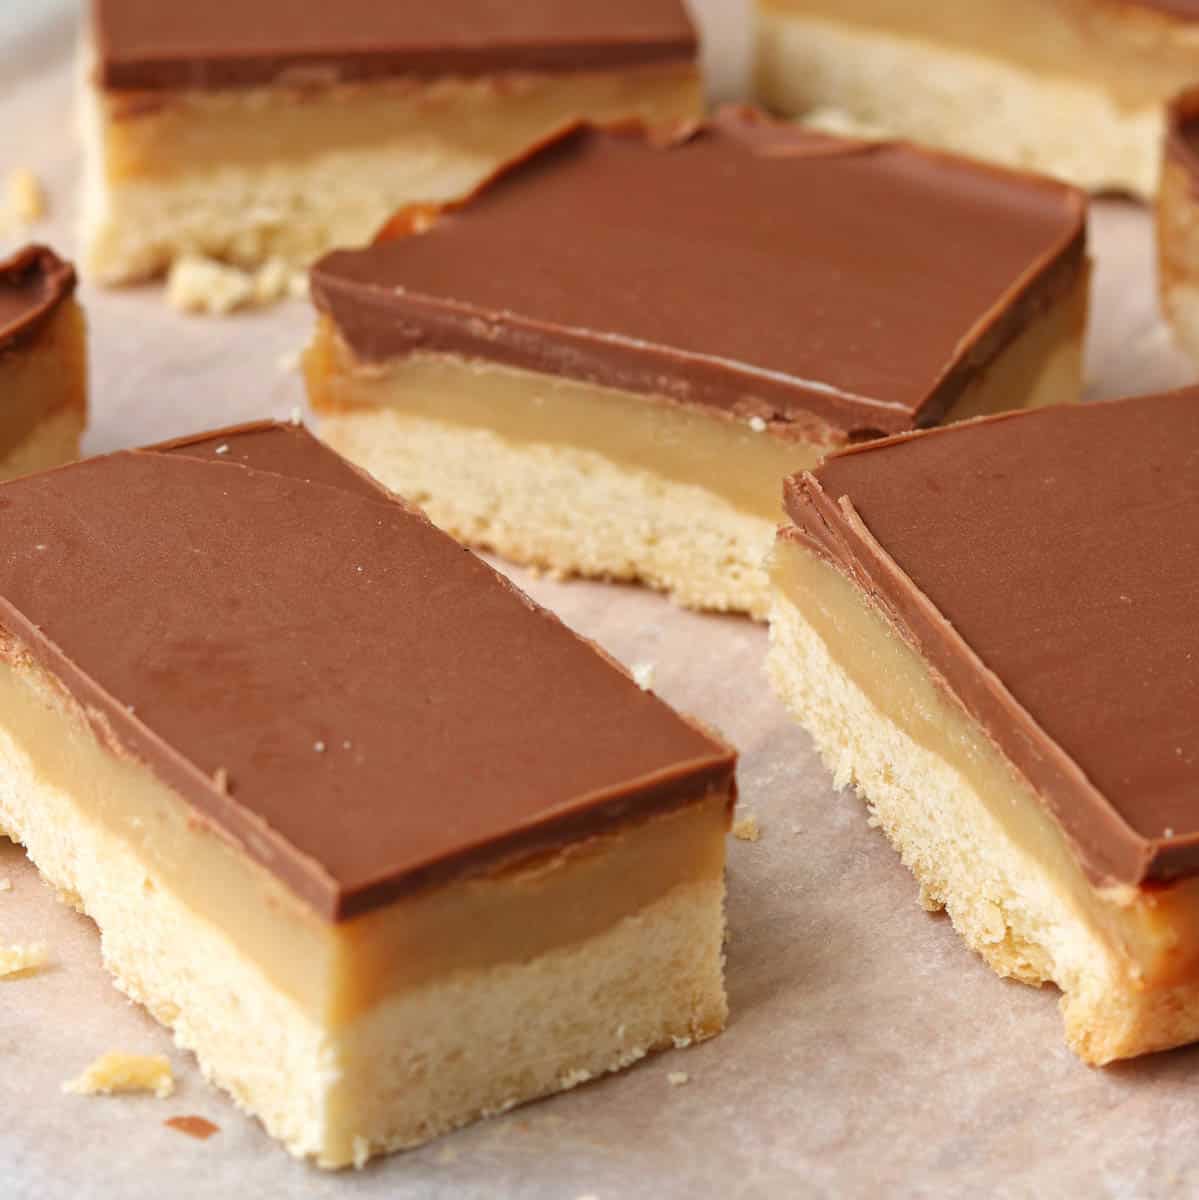 Thermomix Caramel Slices on table